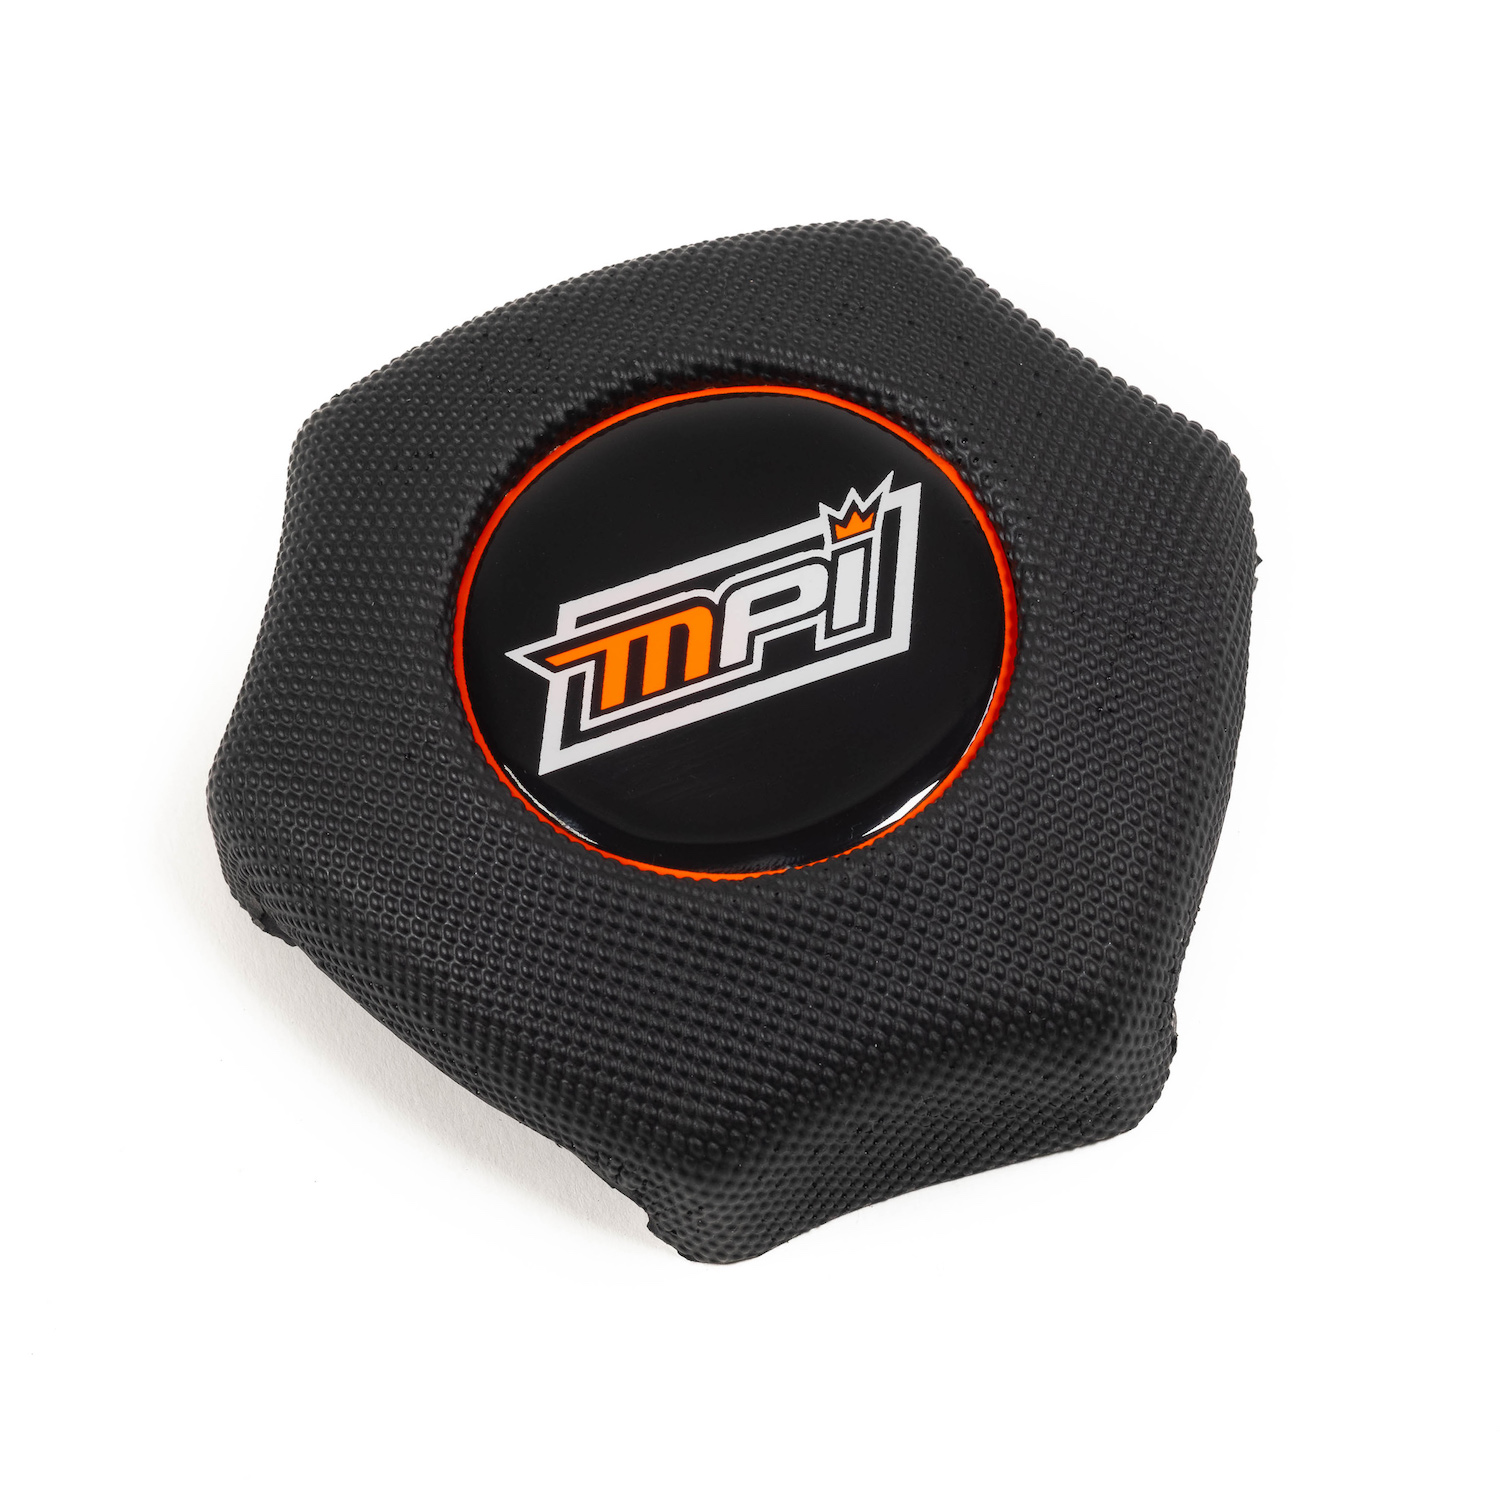 MPI DISHED MODIFIED WHEEL CENTER PAD